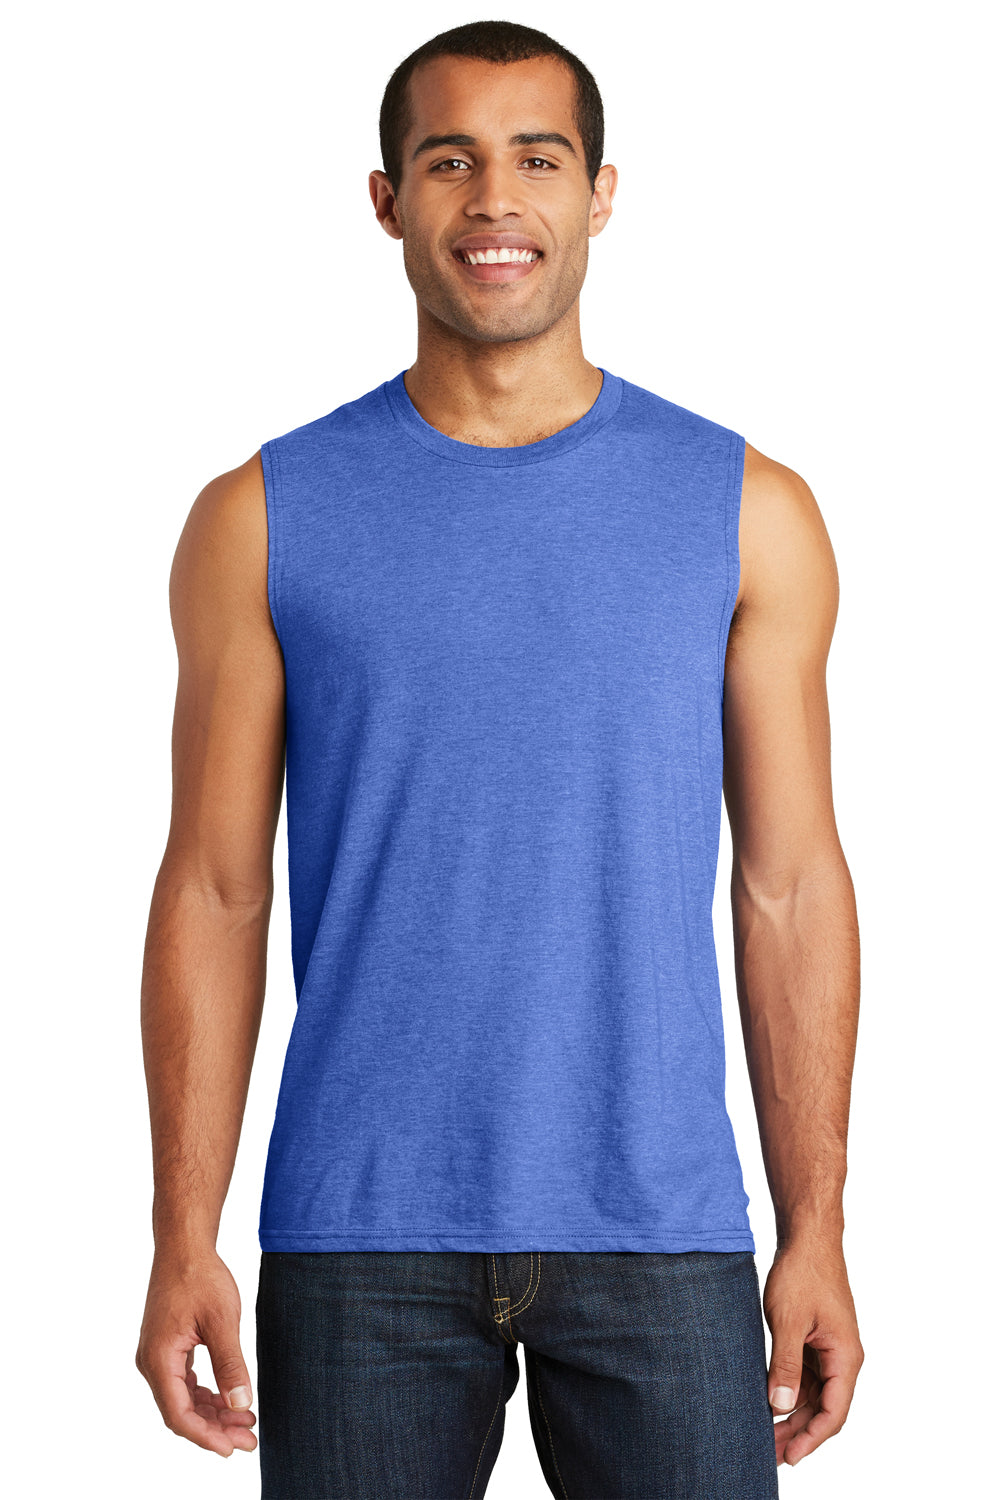 District DT6300 Mens Very Important Muscle Tank Top Royal Blue Frost Front